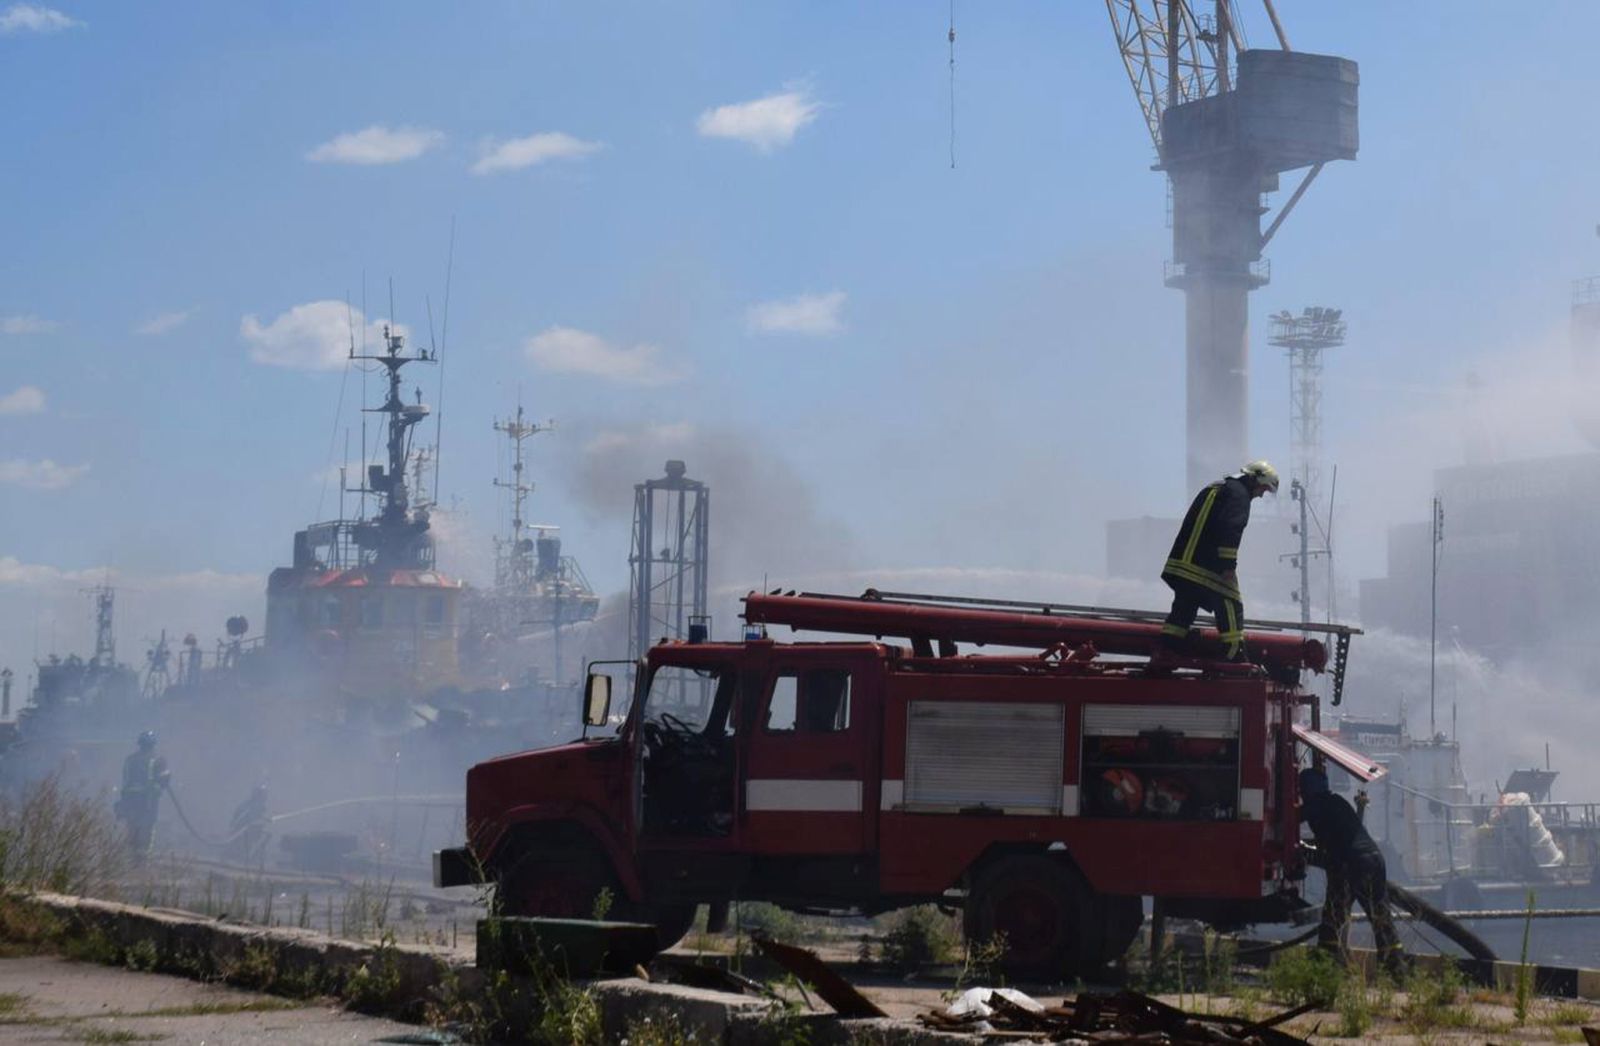 epa10088775 A handout photo released by the Odesa City Hall Press Office on 23 July 2022 shows firefighters working to put out a fire in a sea port of Odesa, southern Ukraine. Ukrainian authorities on 23 July said that the fire at the port was caused by a missile attack. Moscow and Kyiv on 22 July signed a landmark deal to aid grain exports and ease an international food crisis. Russian troops on 24 February entered Ukrainian territory, starting a conflict that has provoked destruction and a humanitarian crisis.  EPA/ODESA CITY HALL PRESS OFFICE HAN -- BEST QUALITY AVAILABLE -- MANDATORY CREDIT -- HANDOUT EDITORIAL USE ONLY/NO SALES